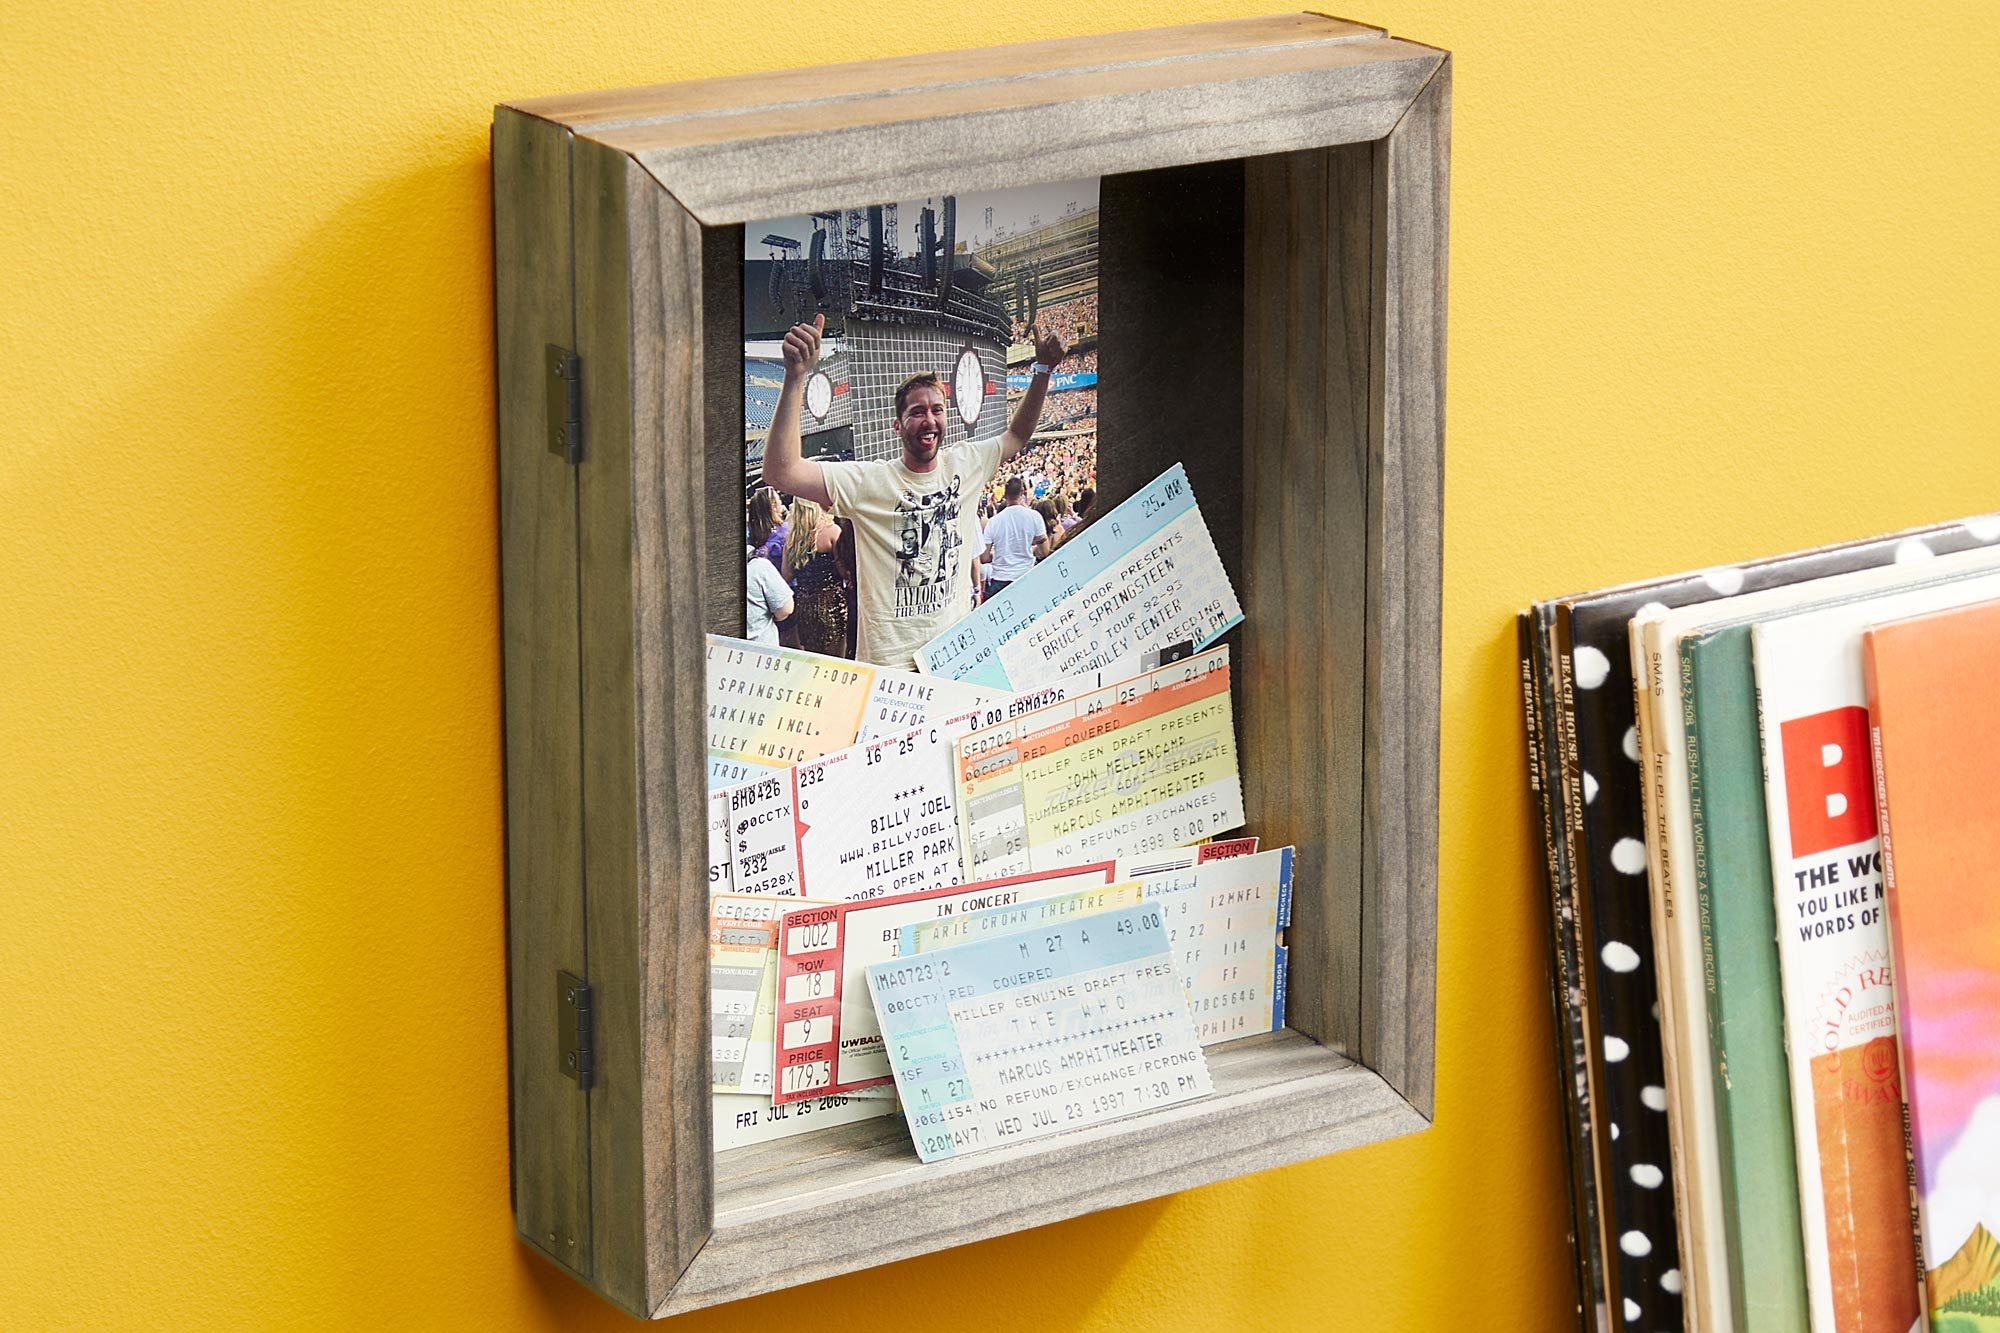 Shadow Box On Wall With Record Player And Records